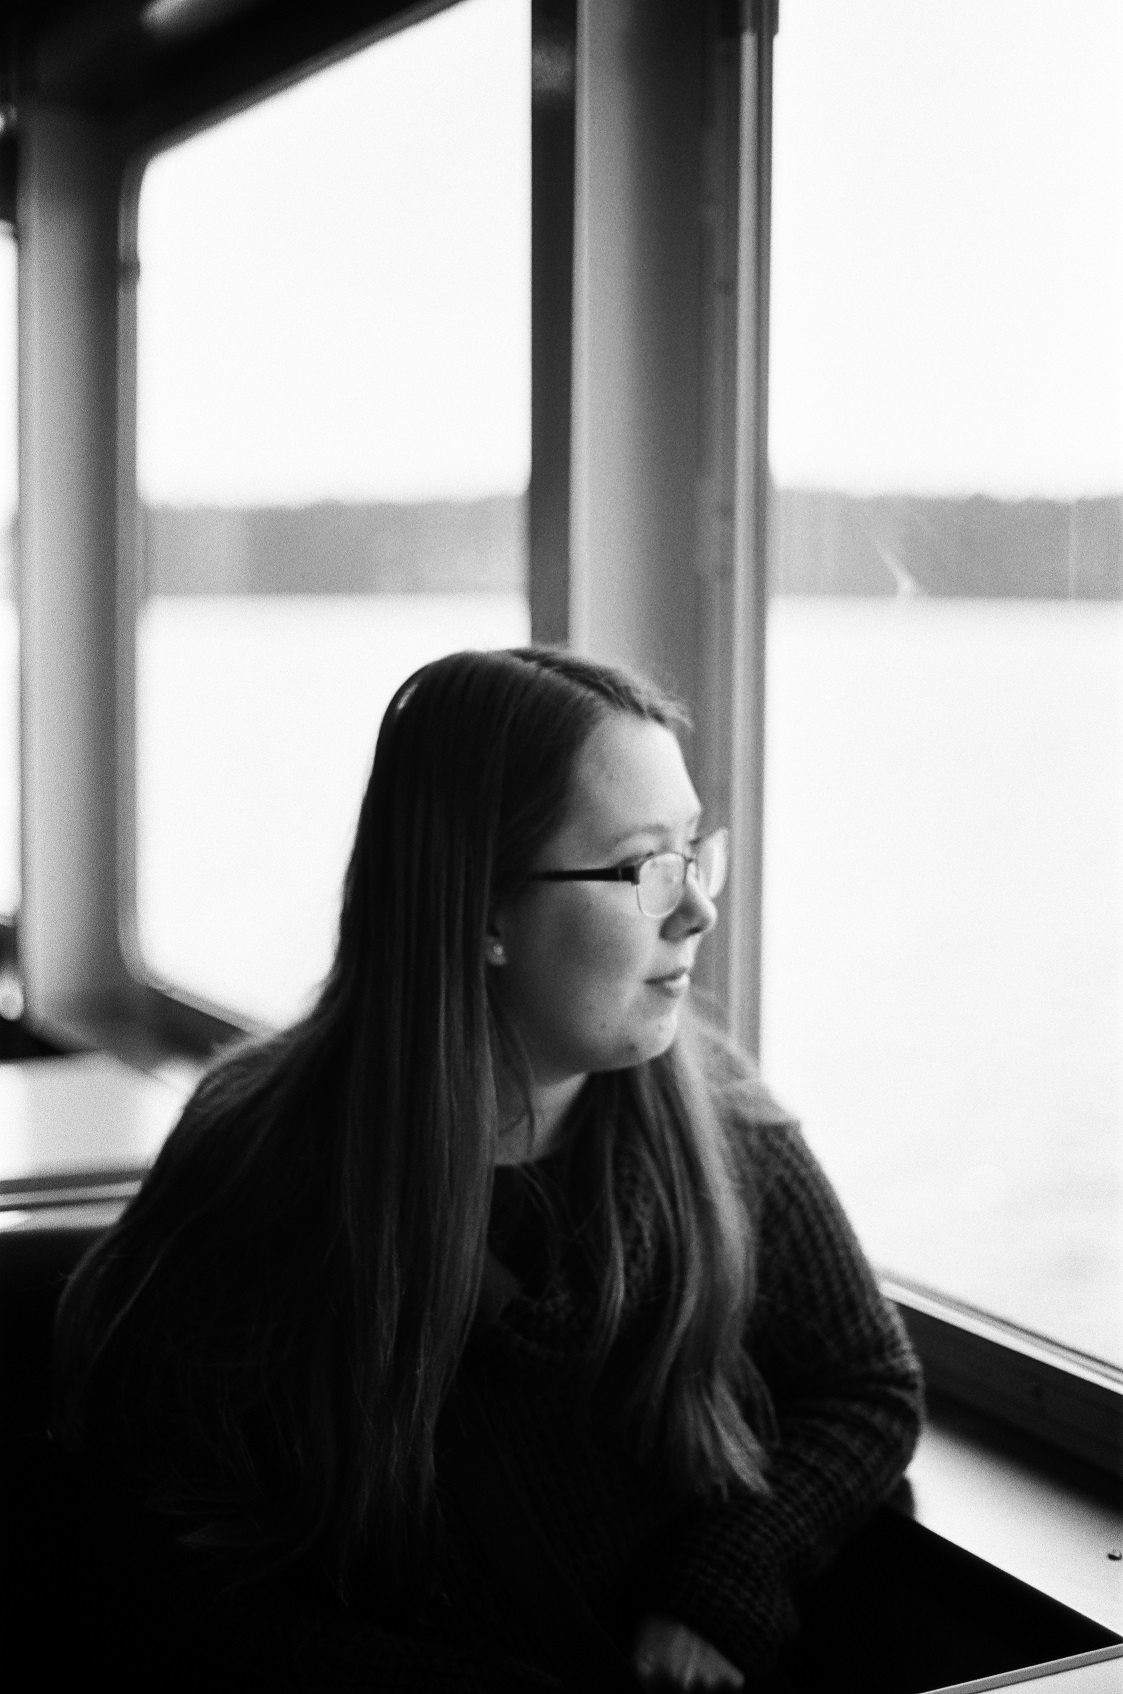 PICTURED: A black and white photo of a woman looking out a window. 